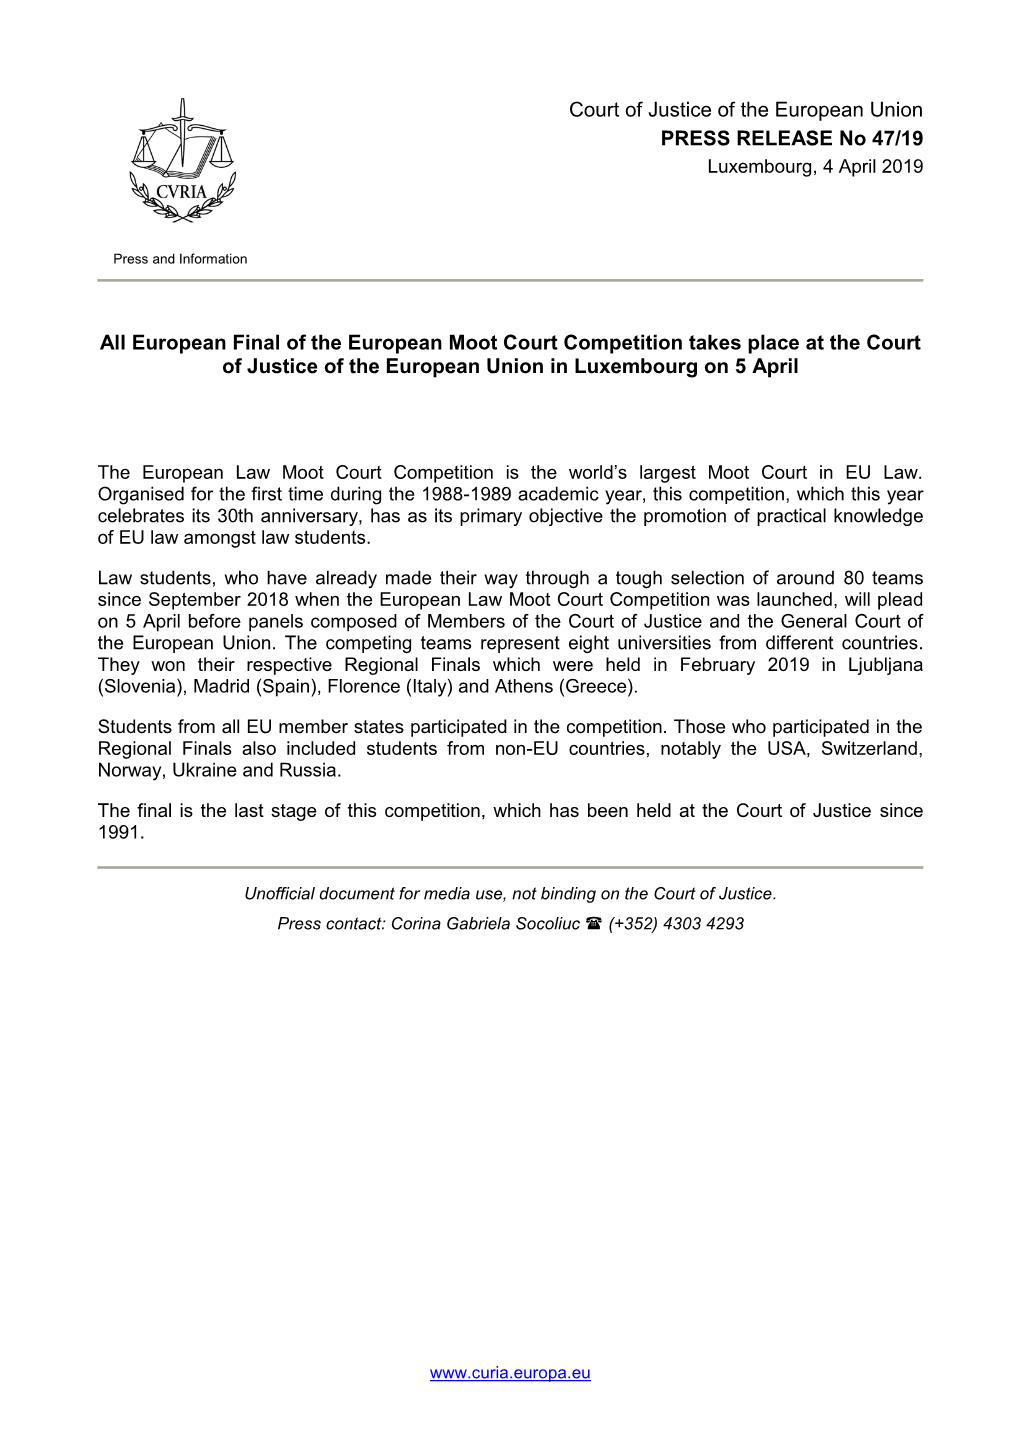 European Final of the European Moot Court Competition Takes Place at the Court of Justice of the European Union in Luxembourg on 5 April